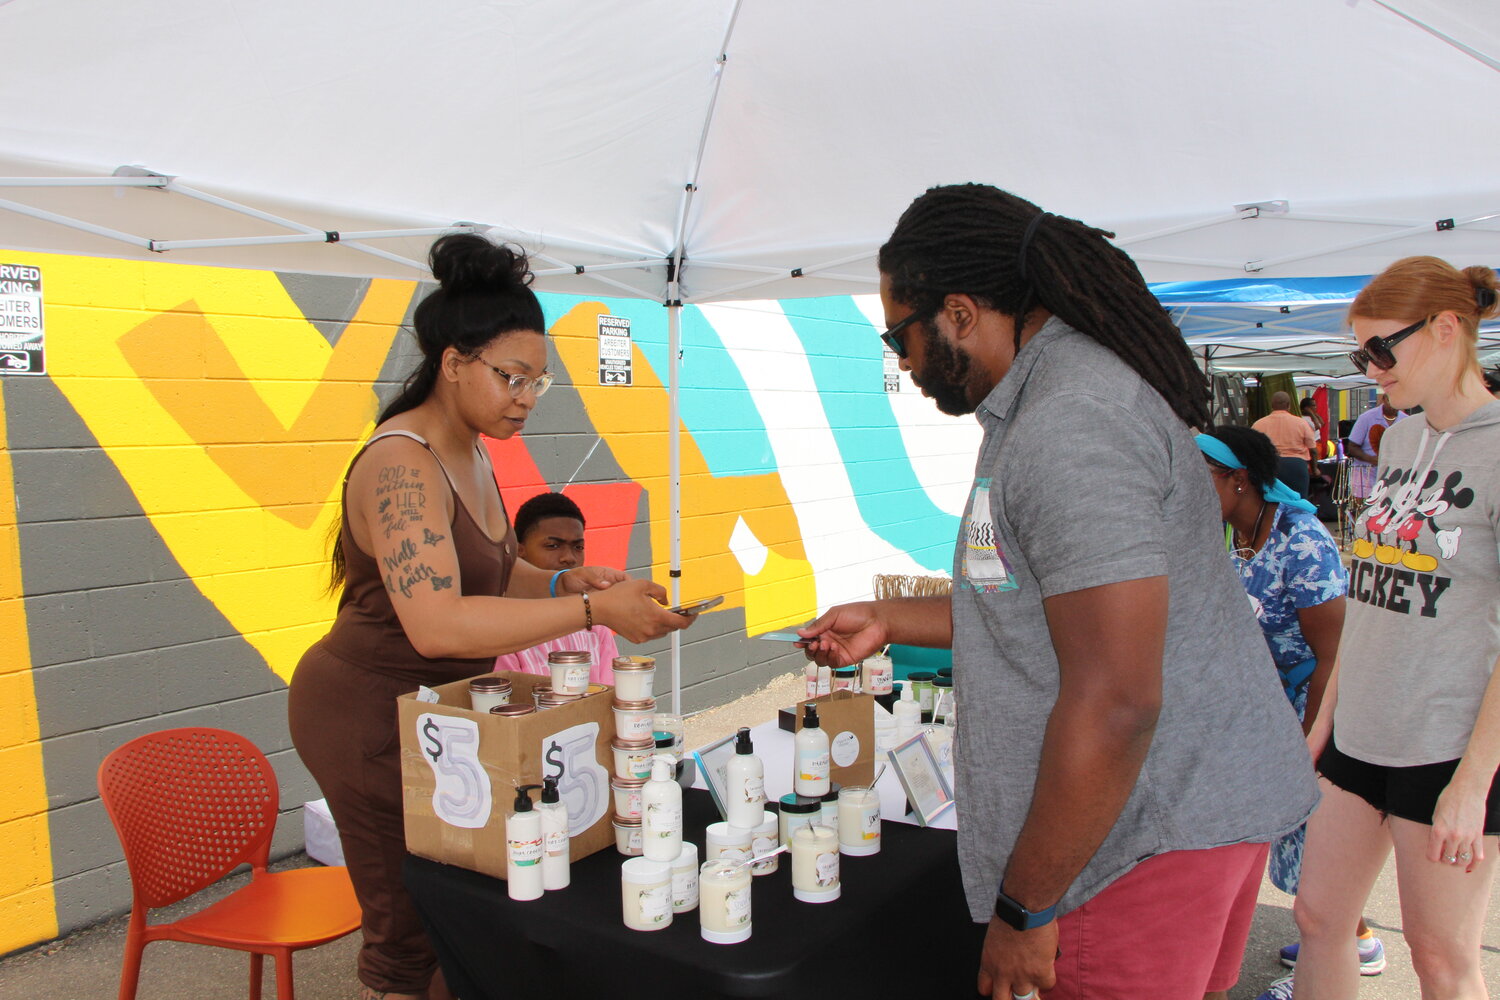 Dipp’d In Hunnie vendors sell body care products at the Soul of the Southside event on Monday, June 19.